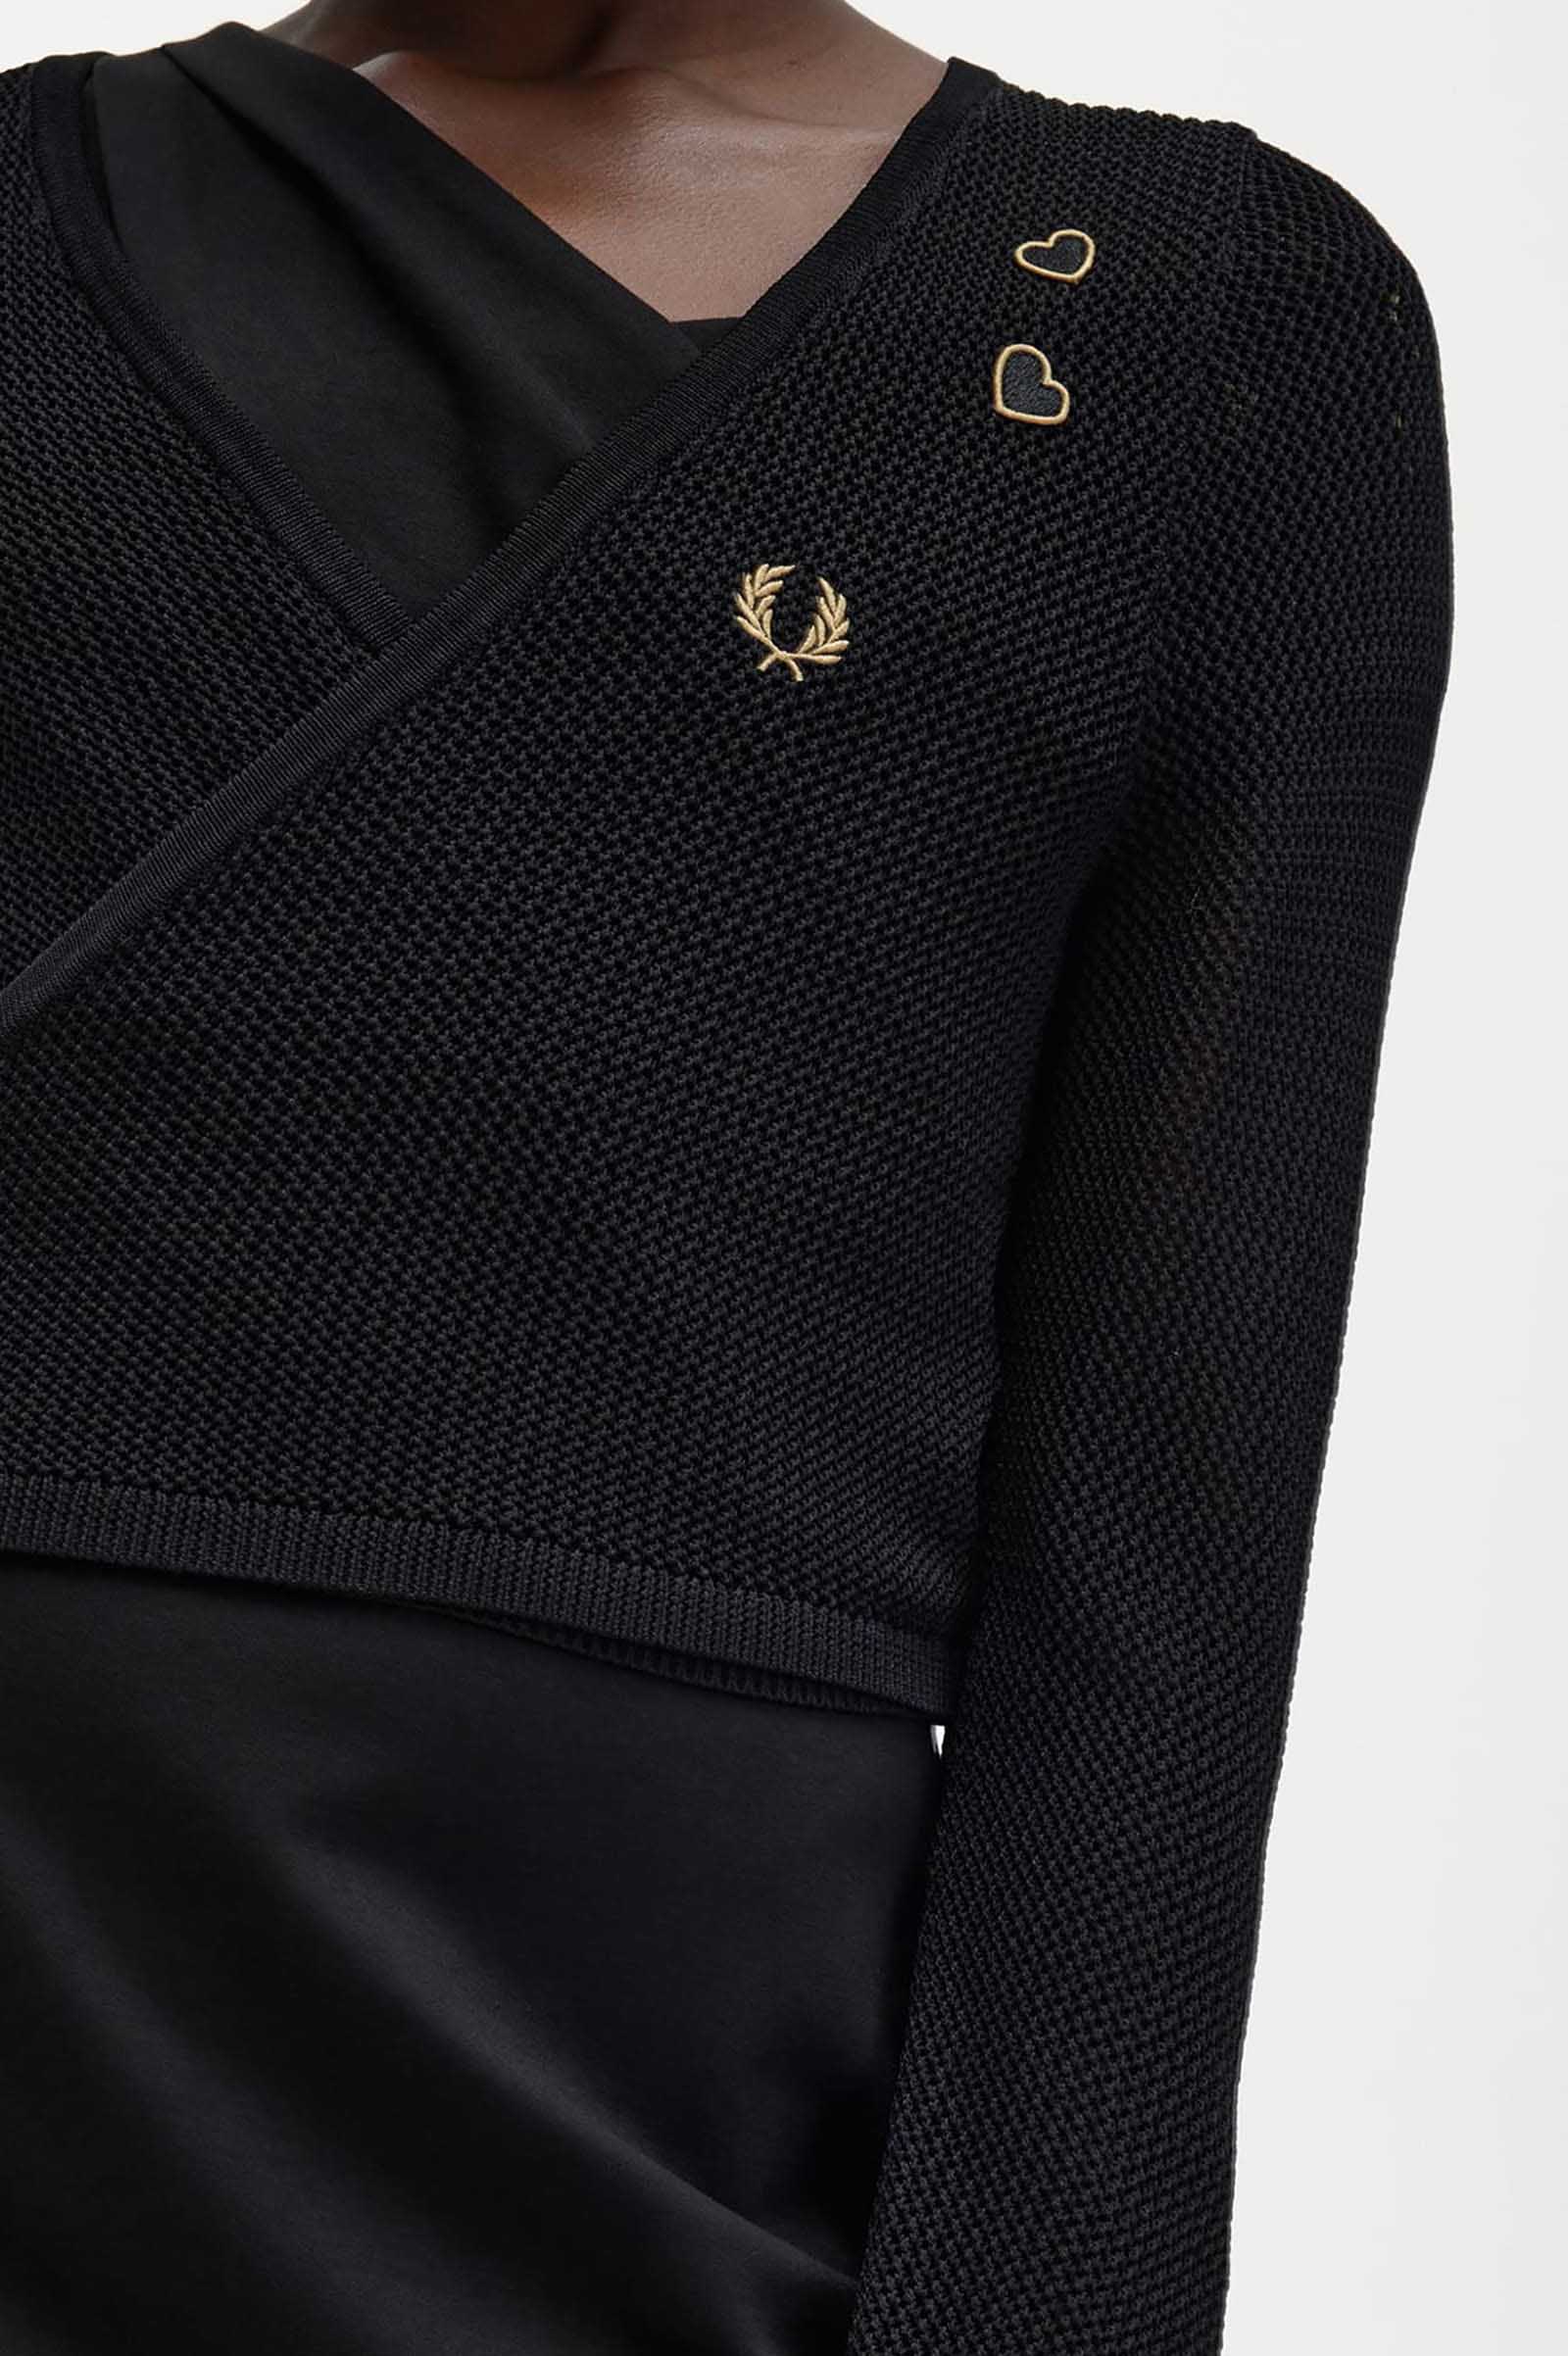 Amy Winehouse Open-Knit Wrap Cardigan(10 102：BLACK): | FRED PERRY 